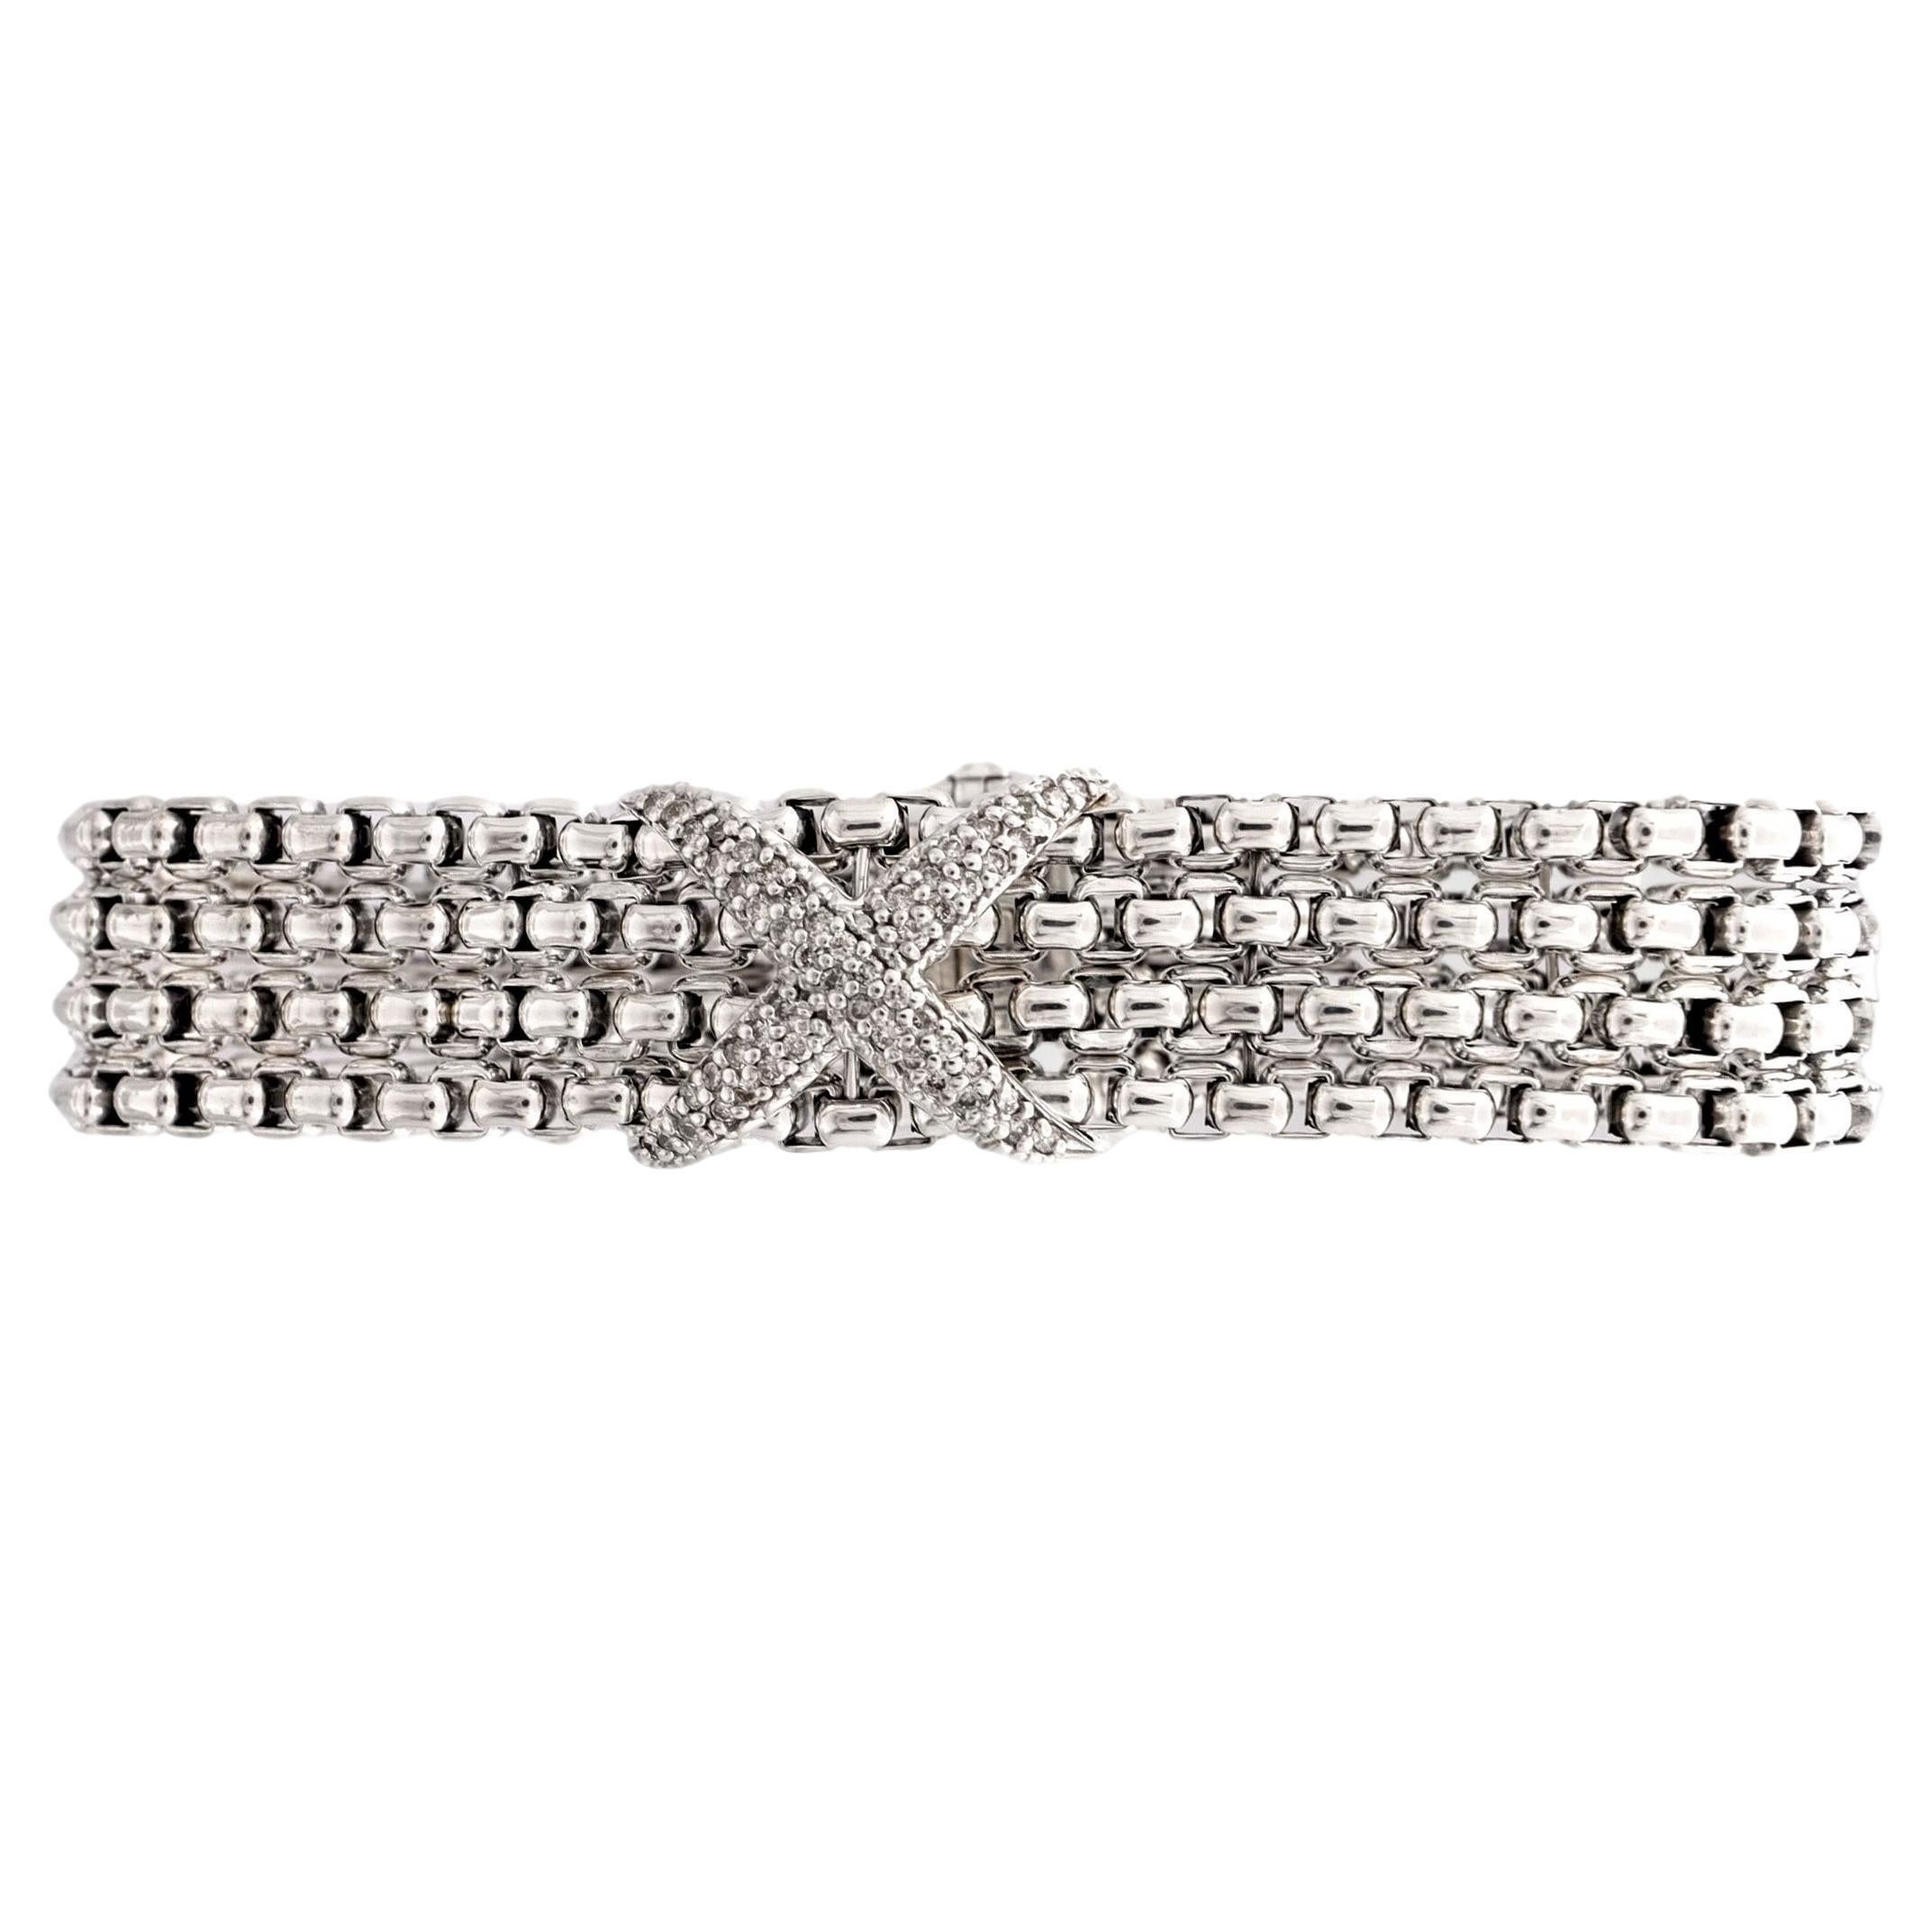 David Yurman 4-Strand Box Chain Diamond Bracelet Expertly fashioned in sterling silver, this captivating bracelet boasts four strands of intricate flexible box chains interwoven flawlessly. A delicate pave diamond X centerpiece sparkles subtly,